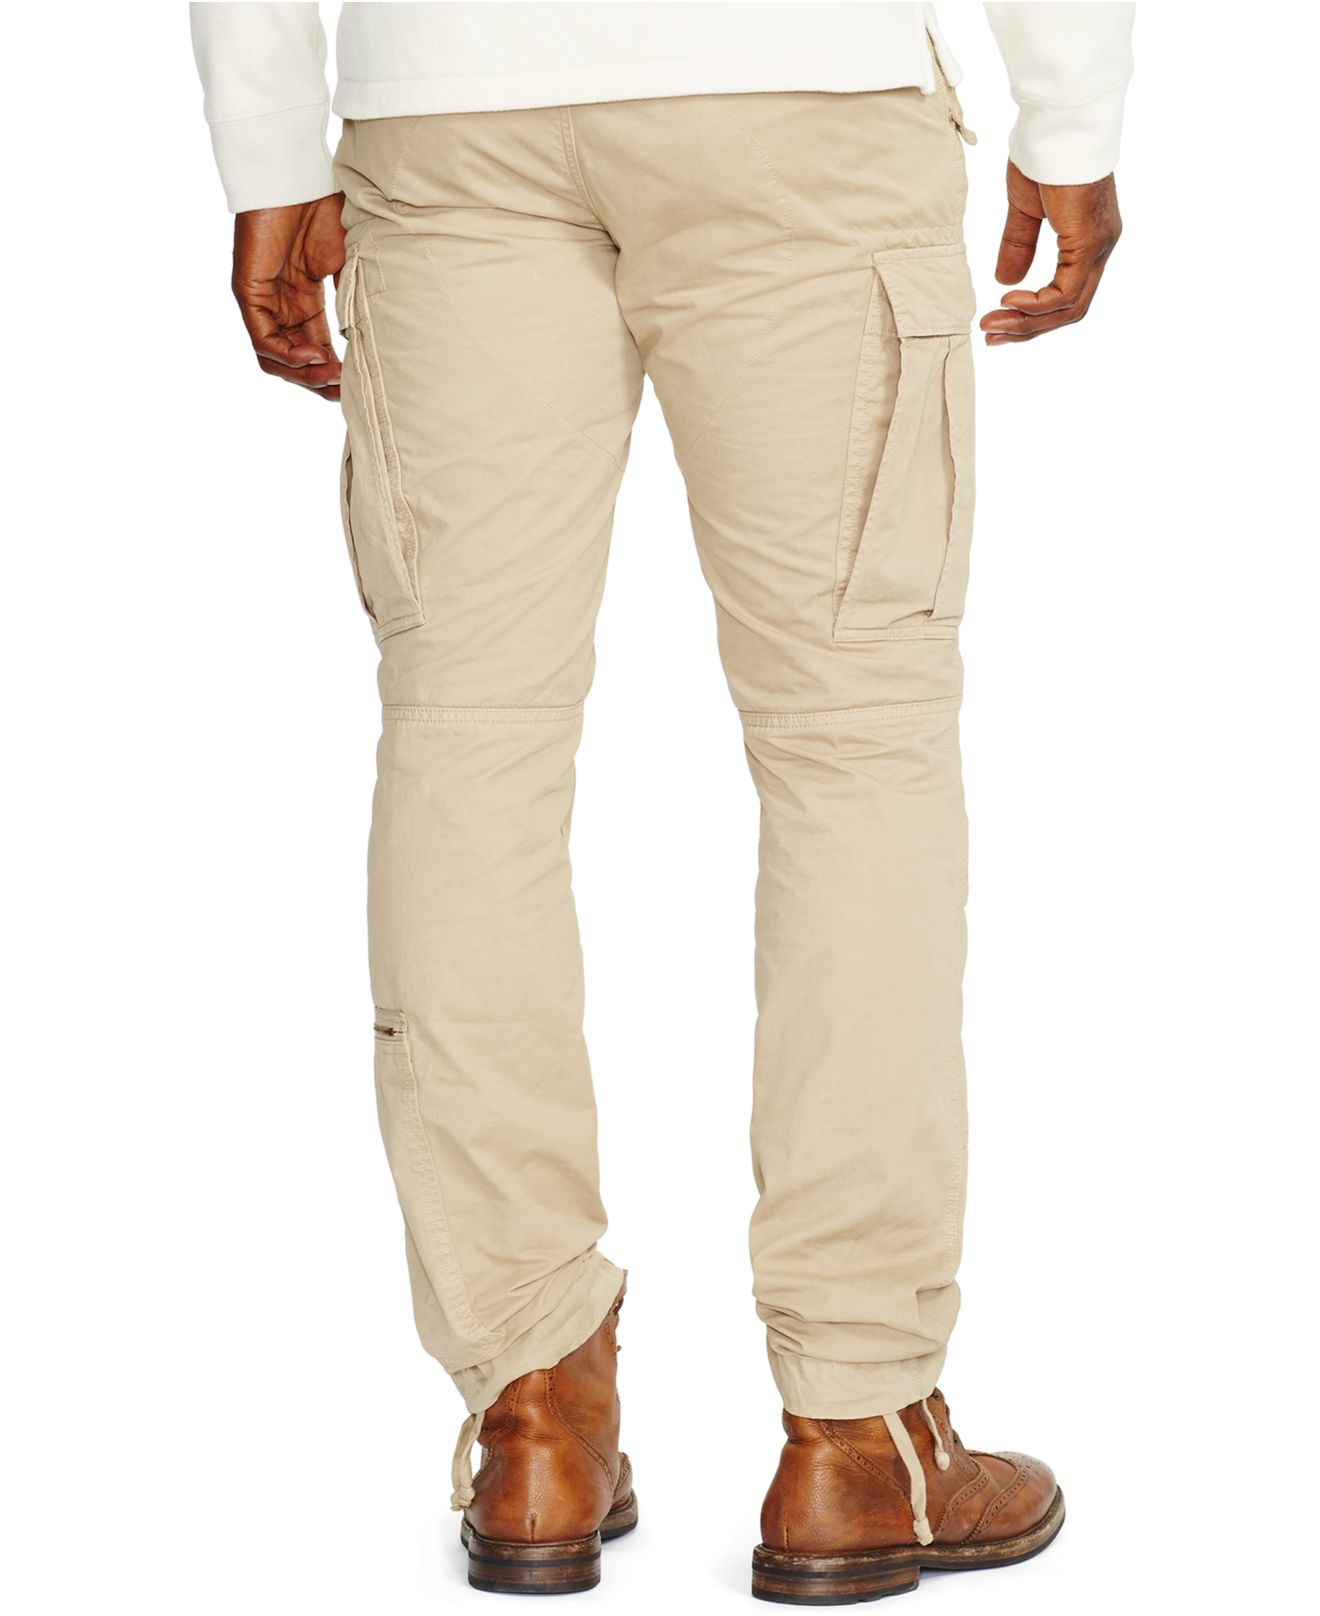 Lyst - Polo Ralph Lauren Big And Tall Military Cargo Pant in Natural